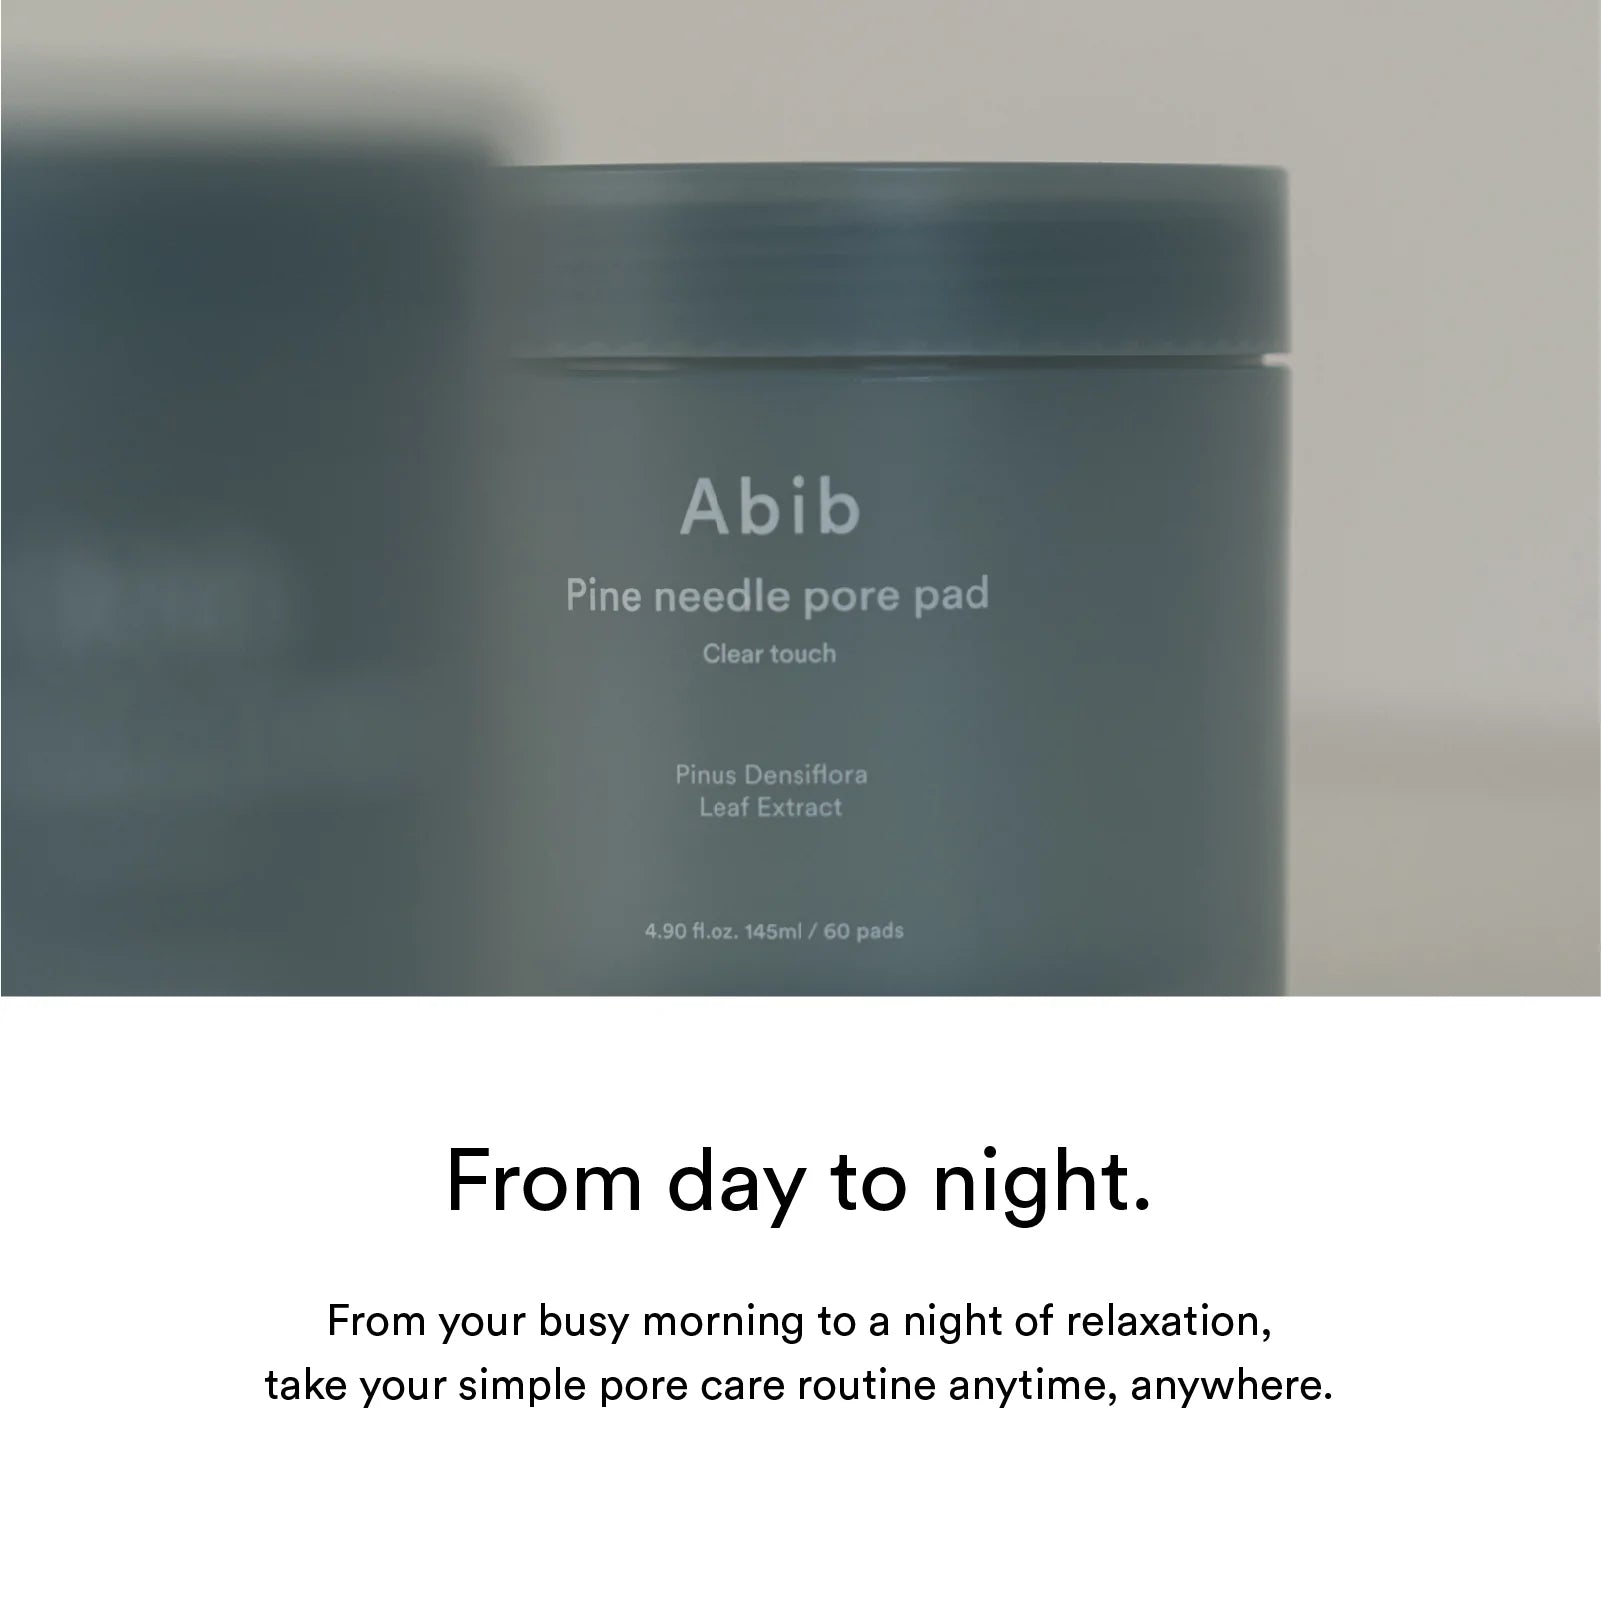 Abib - Pine Needle Pore Pad Clear Touch